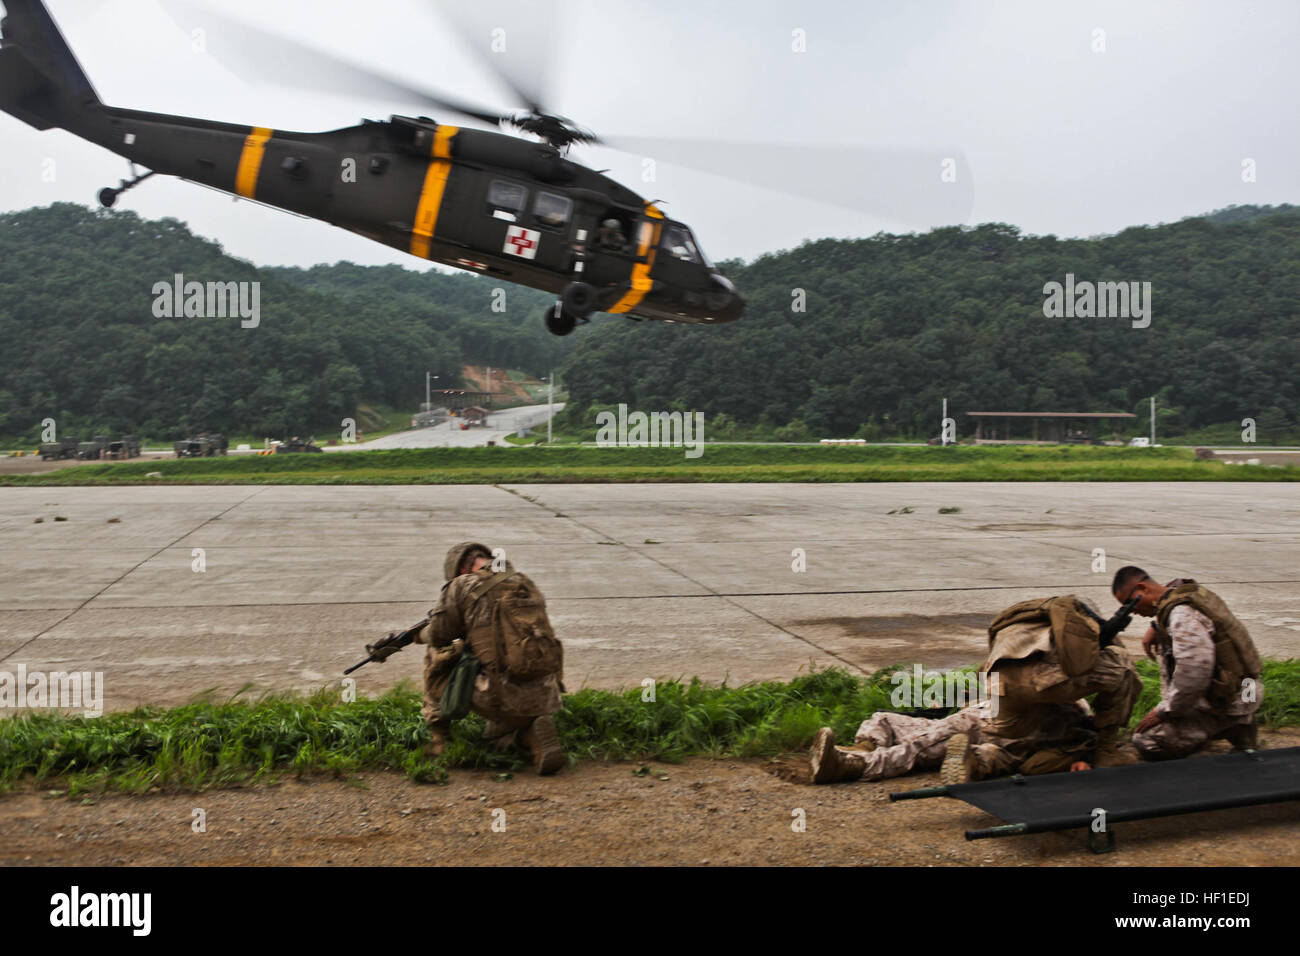 A UH-60 Black Hawk helicopter takes off after picking up a simulated casualty during medical evacuation training between U.S. Marines, soldiers and Navy corpsmen at the Rodriguez Live-Fire Complex Aug. 18 as part of the Korean Marine Exchange Program 13-8. KMEP 13-8, a combined, annual training exercise that enhances the combat readiness and interoperability of Republic of Korea and U.S. Marine Corps forces, is just one in a series of continuous, combined training exercises designed to promote stability on the Korean Peninsula, enhance the alliance, and strengthen ROK and U.S. military capabil Stock Photo